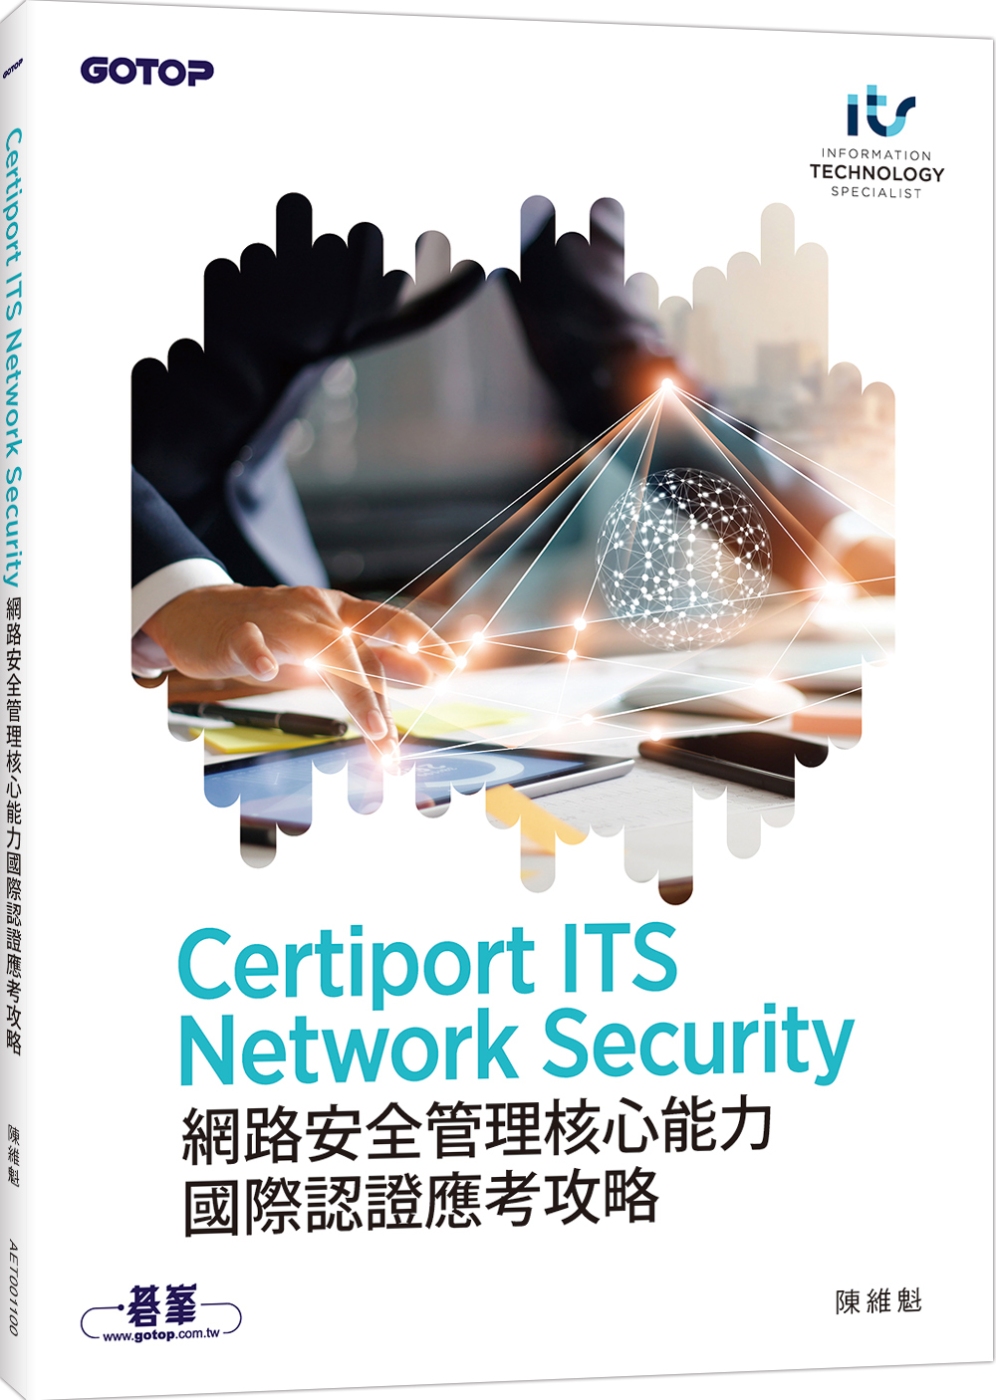 Certiport ITS Network Security...